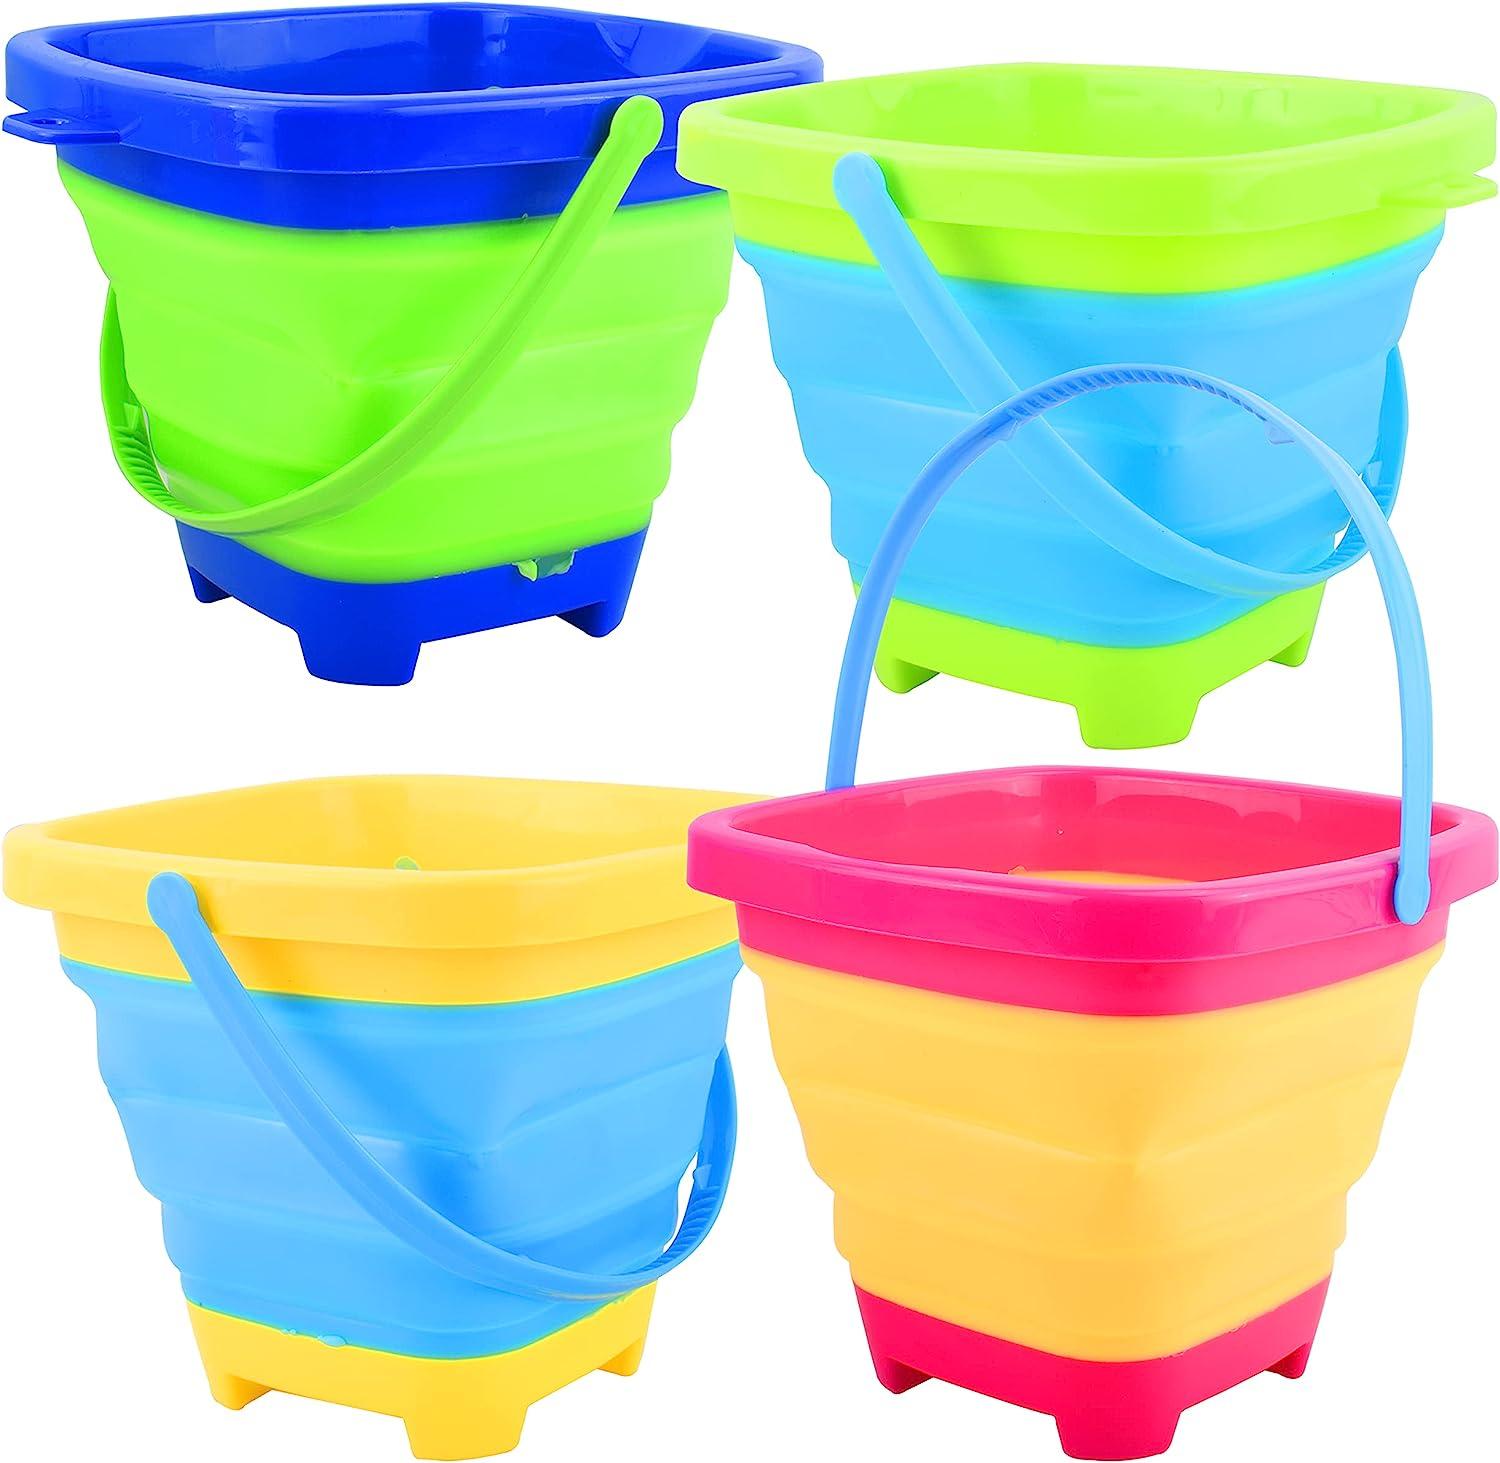 JOYIN 4 Collapsible Basket Buckets, 2L Square Foldable Pail Portable Bucket  for Summer Beach, Camping Gear Water, Space Saving Outdoor Waterpot,  Portable Fishing Water Pail, Easter Egg Hunting